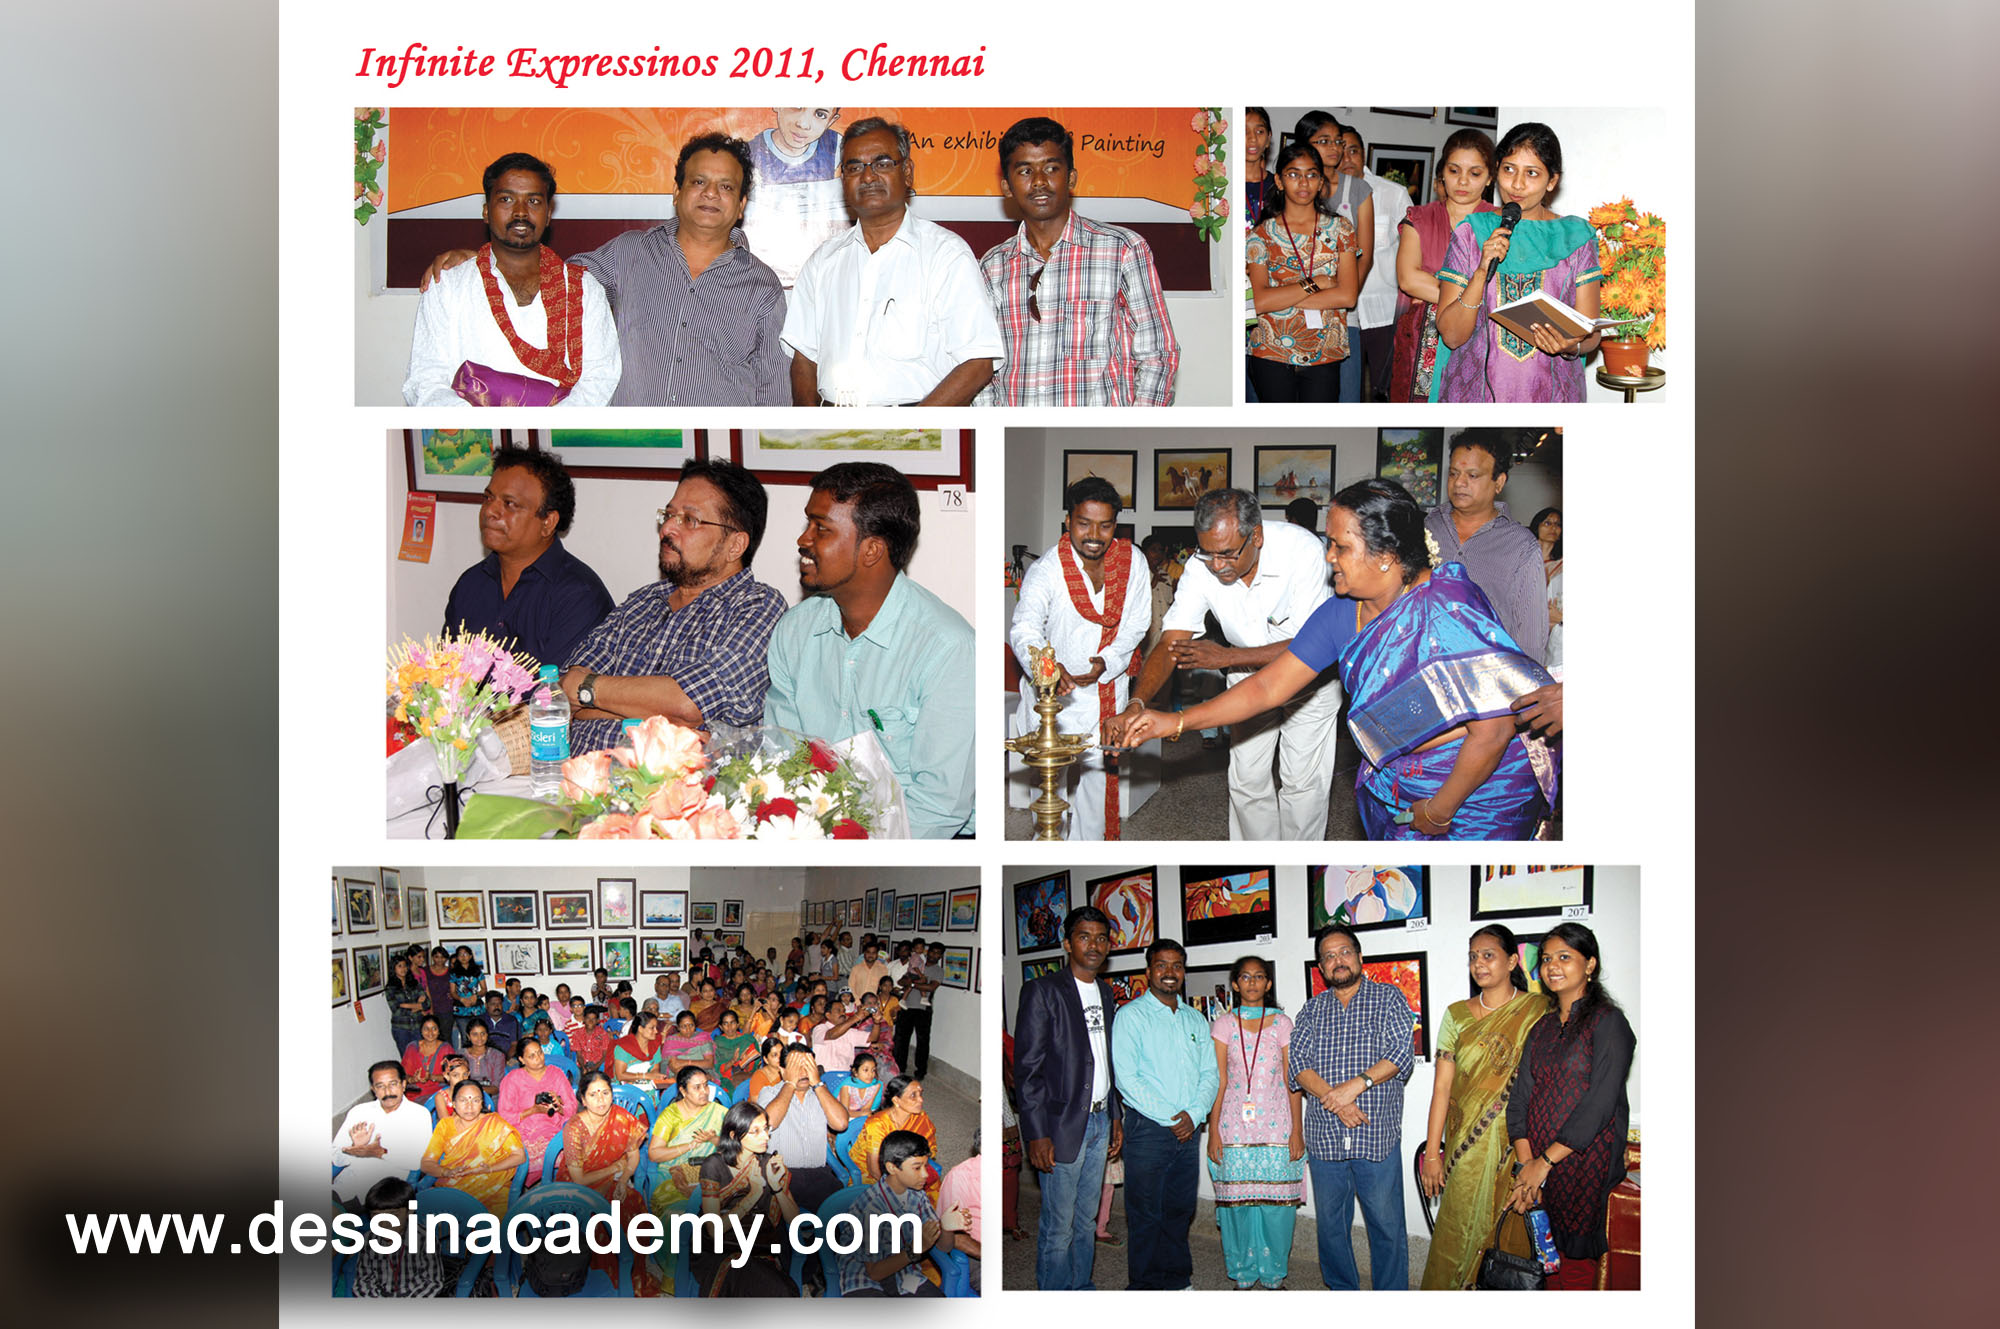 Dessin School of arts Event Gallery 5, Painting classes in ThiruverkaduV A Play School